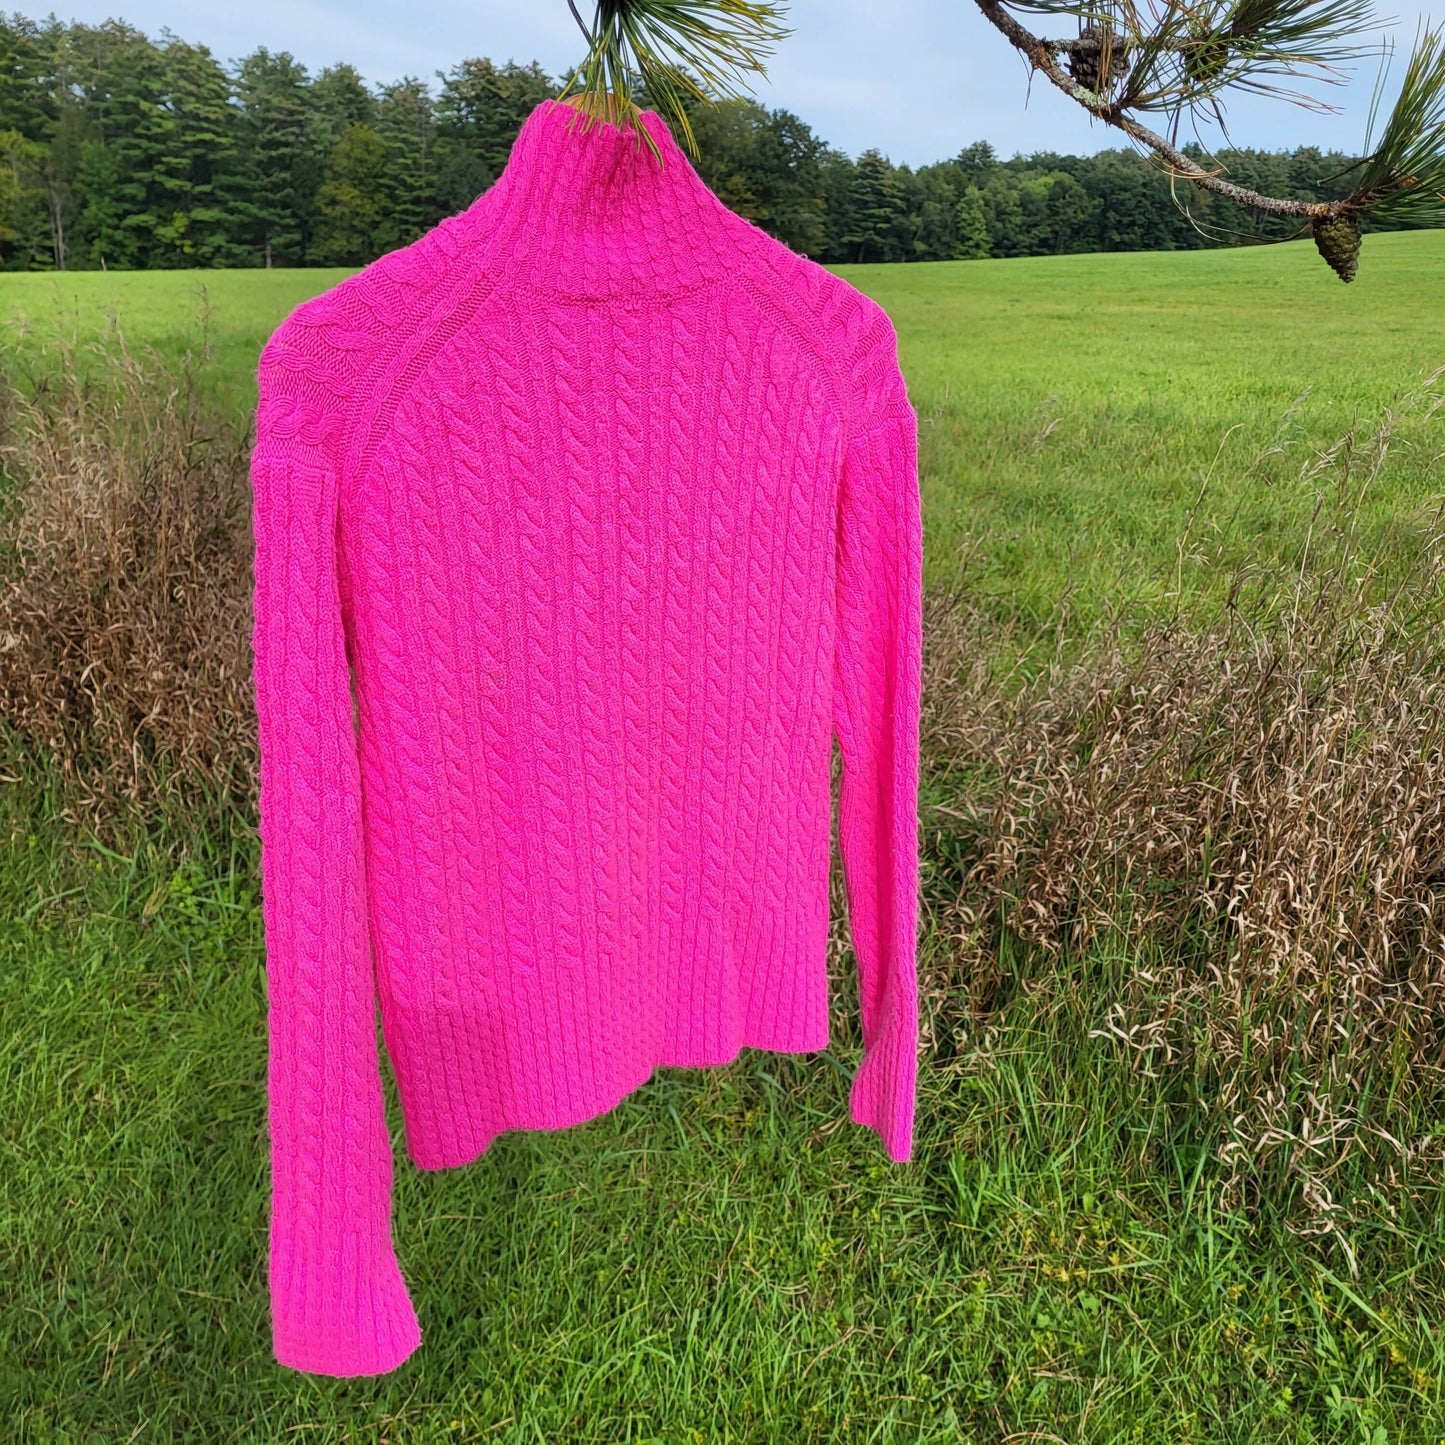 French Connection Babysoft Cable Knit High Neck Sweater - Cable Knit - Pink/Bright Prosecco Pink - S